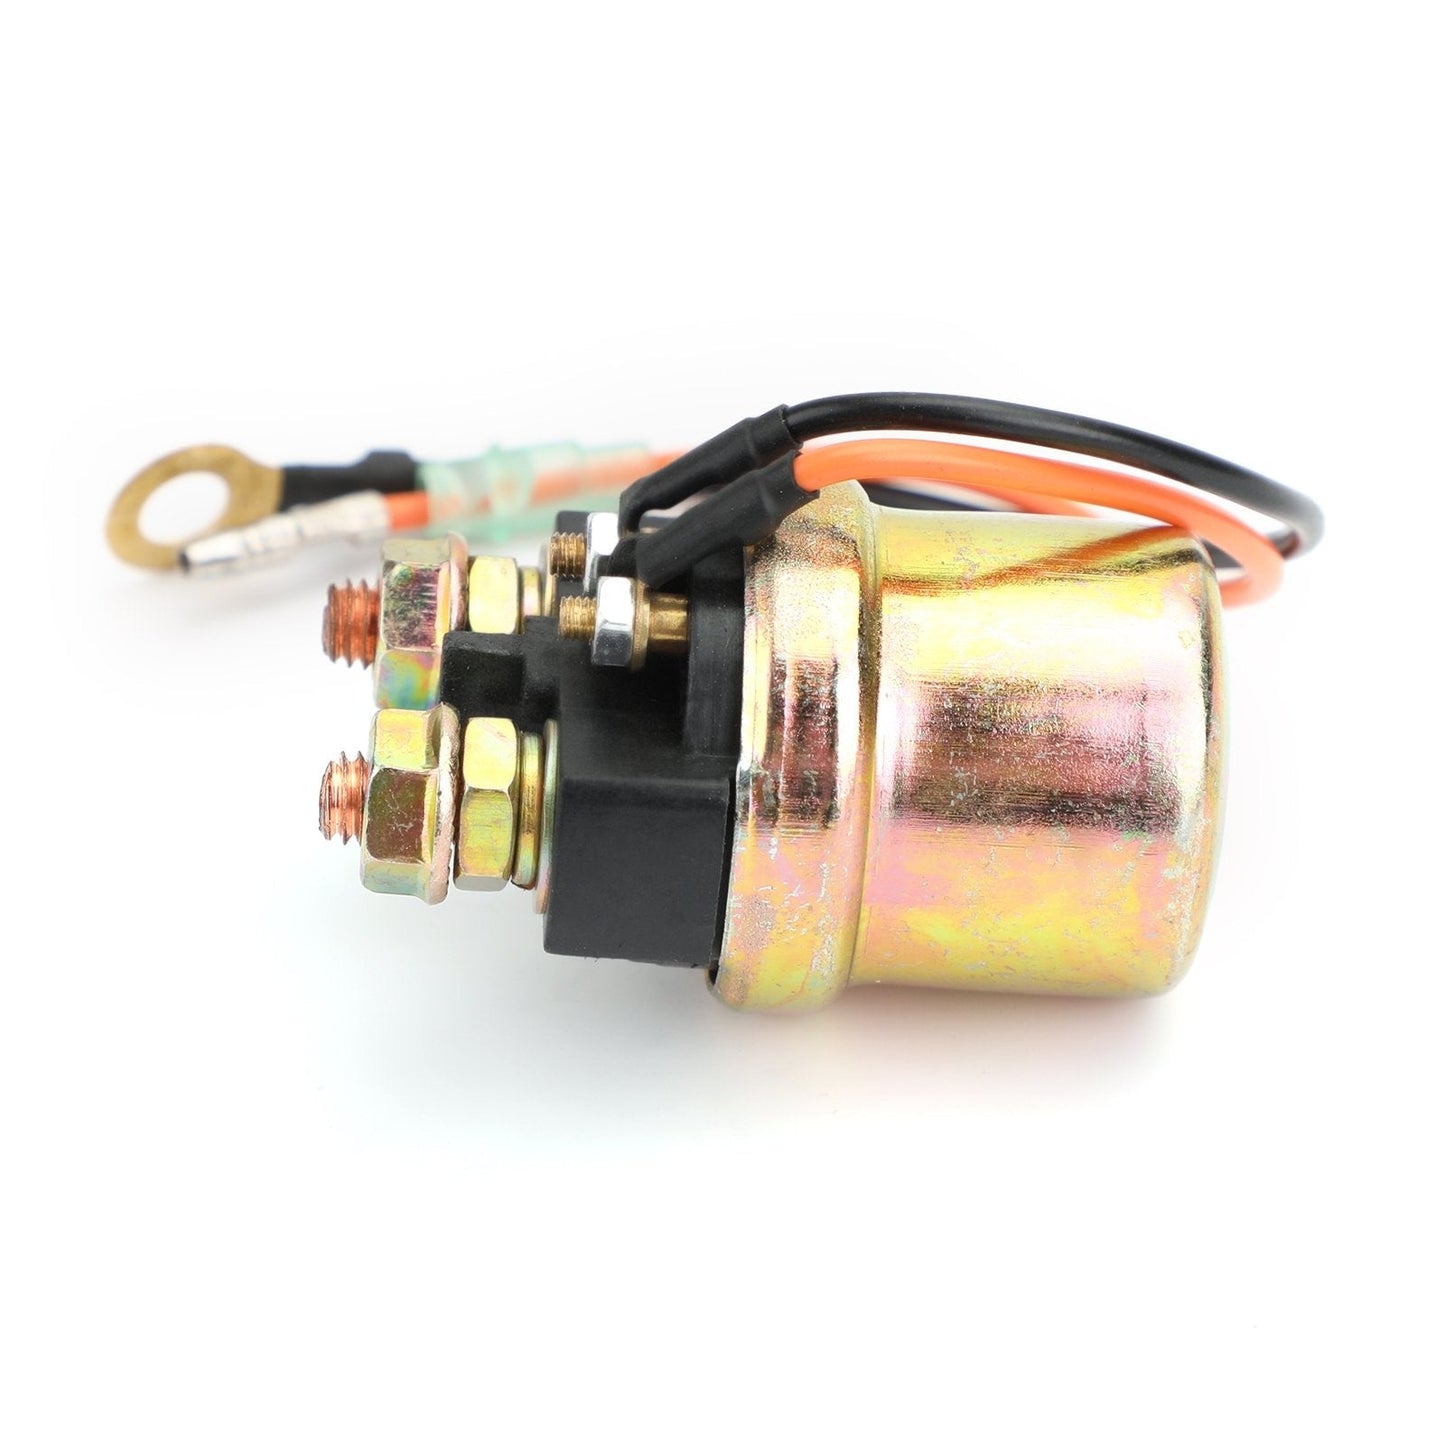 Starter Relay Solenoid For YAMAHA OUTBOARD 90HP 100HP 115HP 4-Stroke WR650 650cc Generic